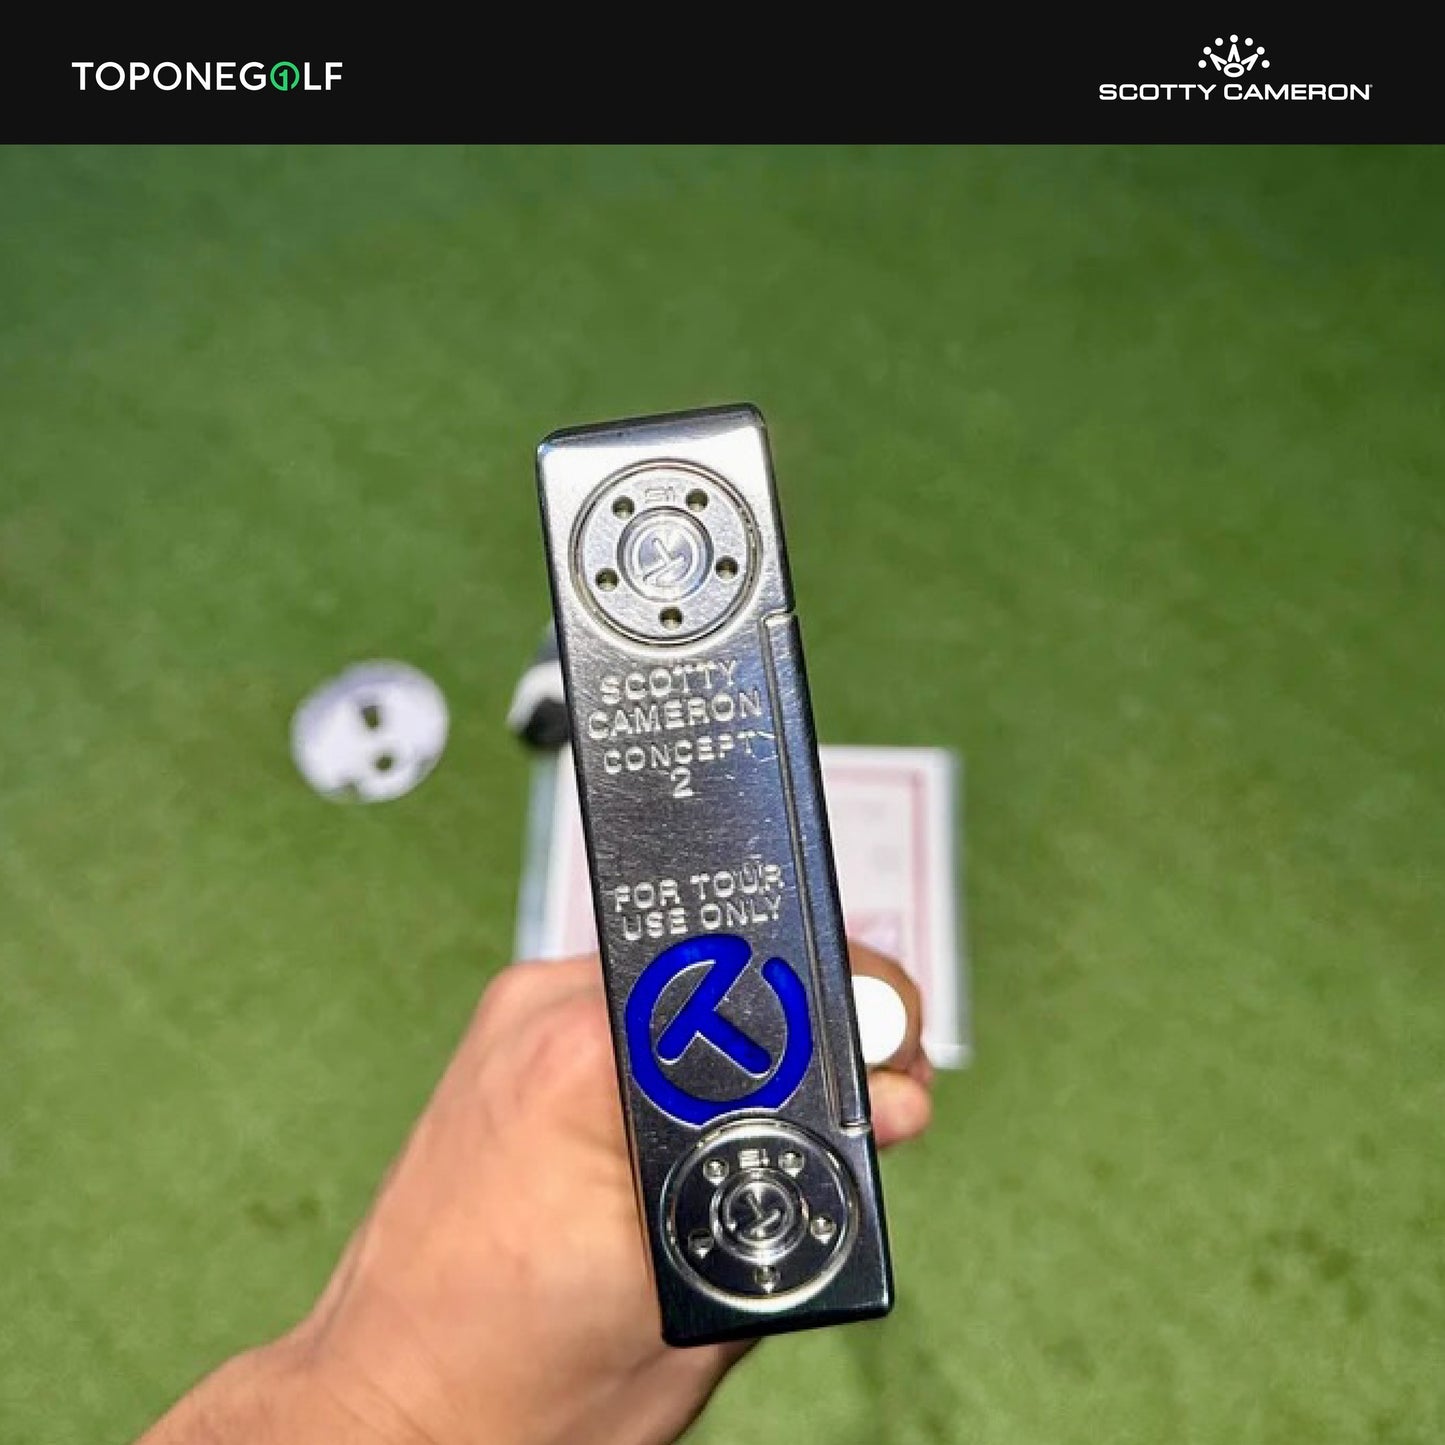 SCOTTY CAMERON TOUR ONLY – CONCEPT 2 (MỚI 99%)